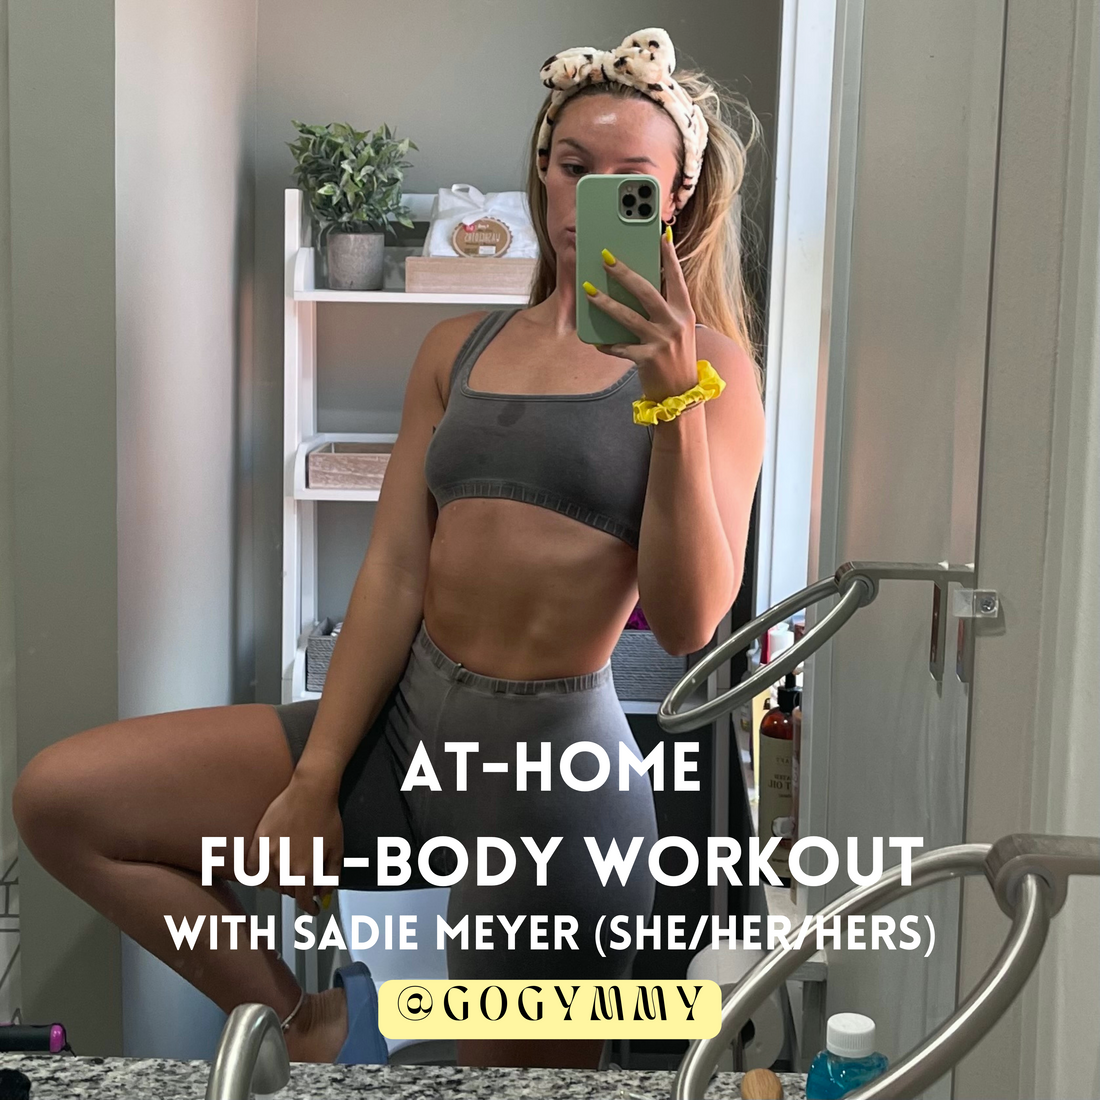 At-Home Full-Body Workout with Sadie Meyer (she/her/hers)